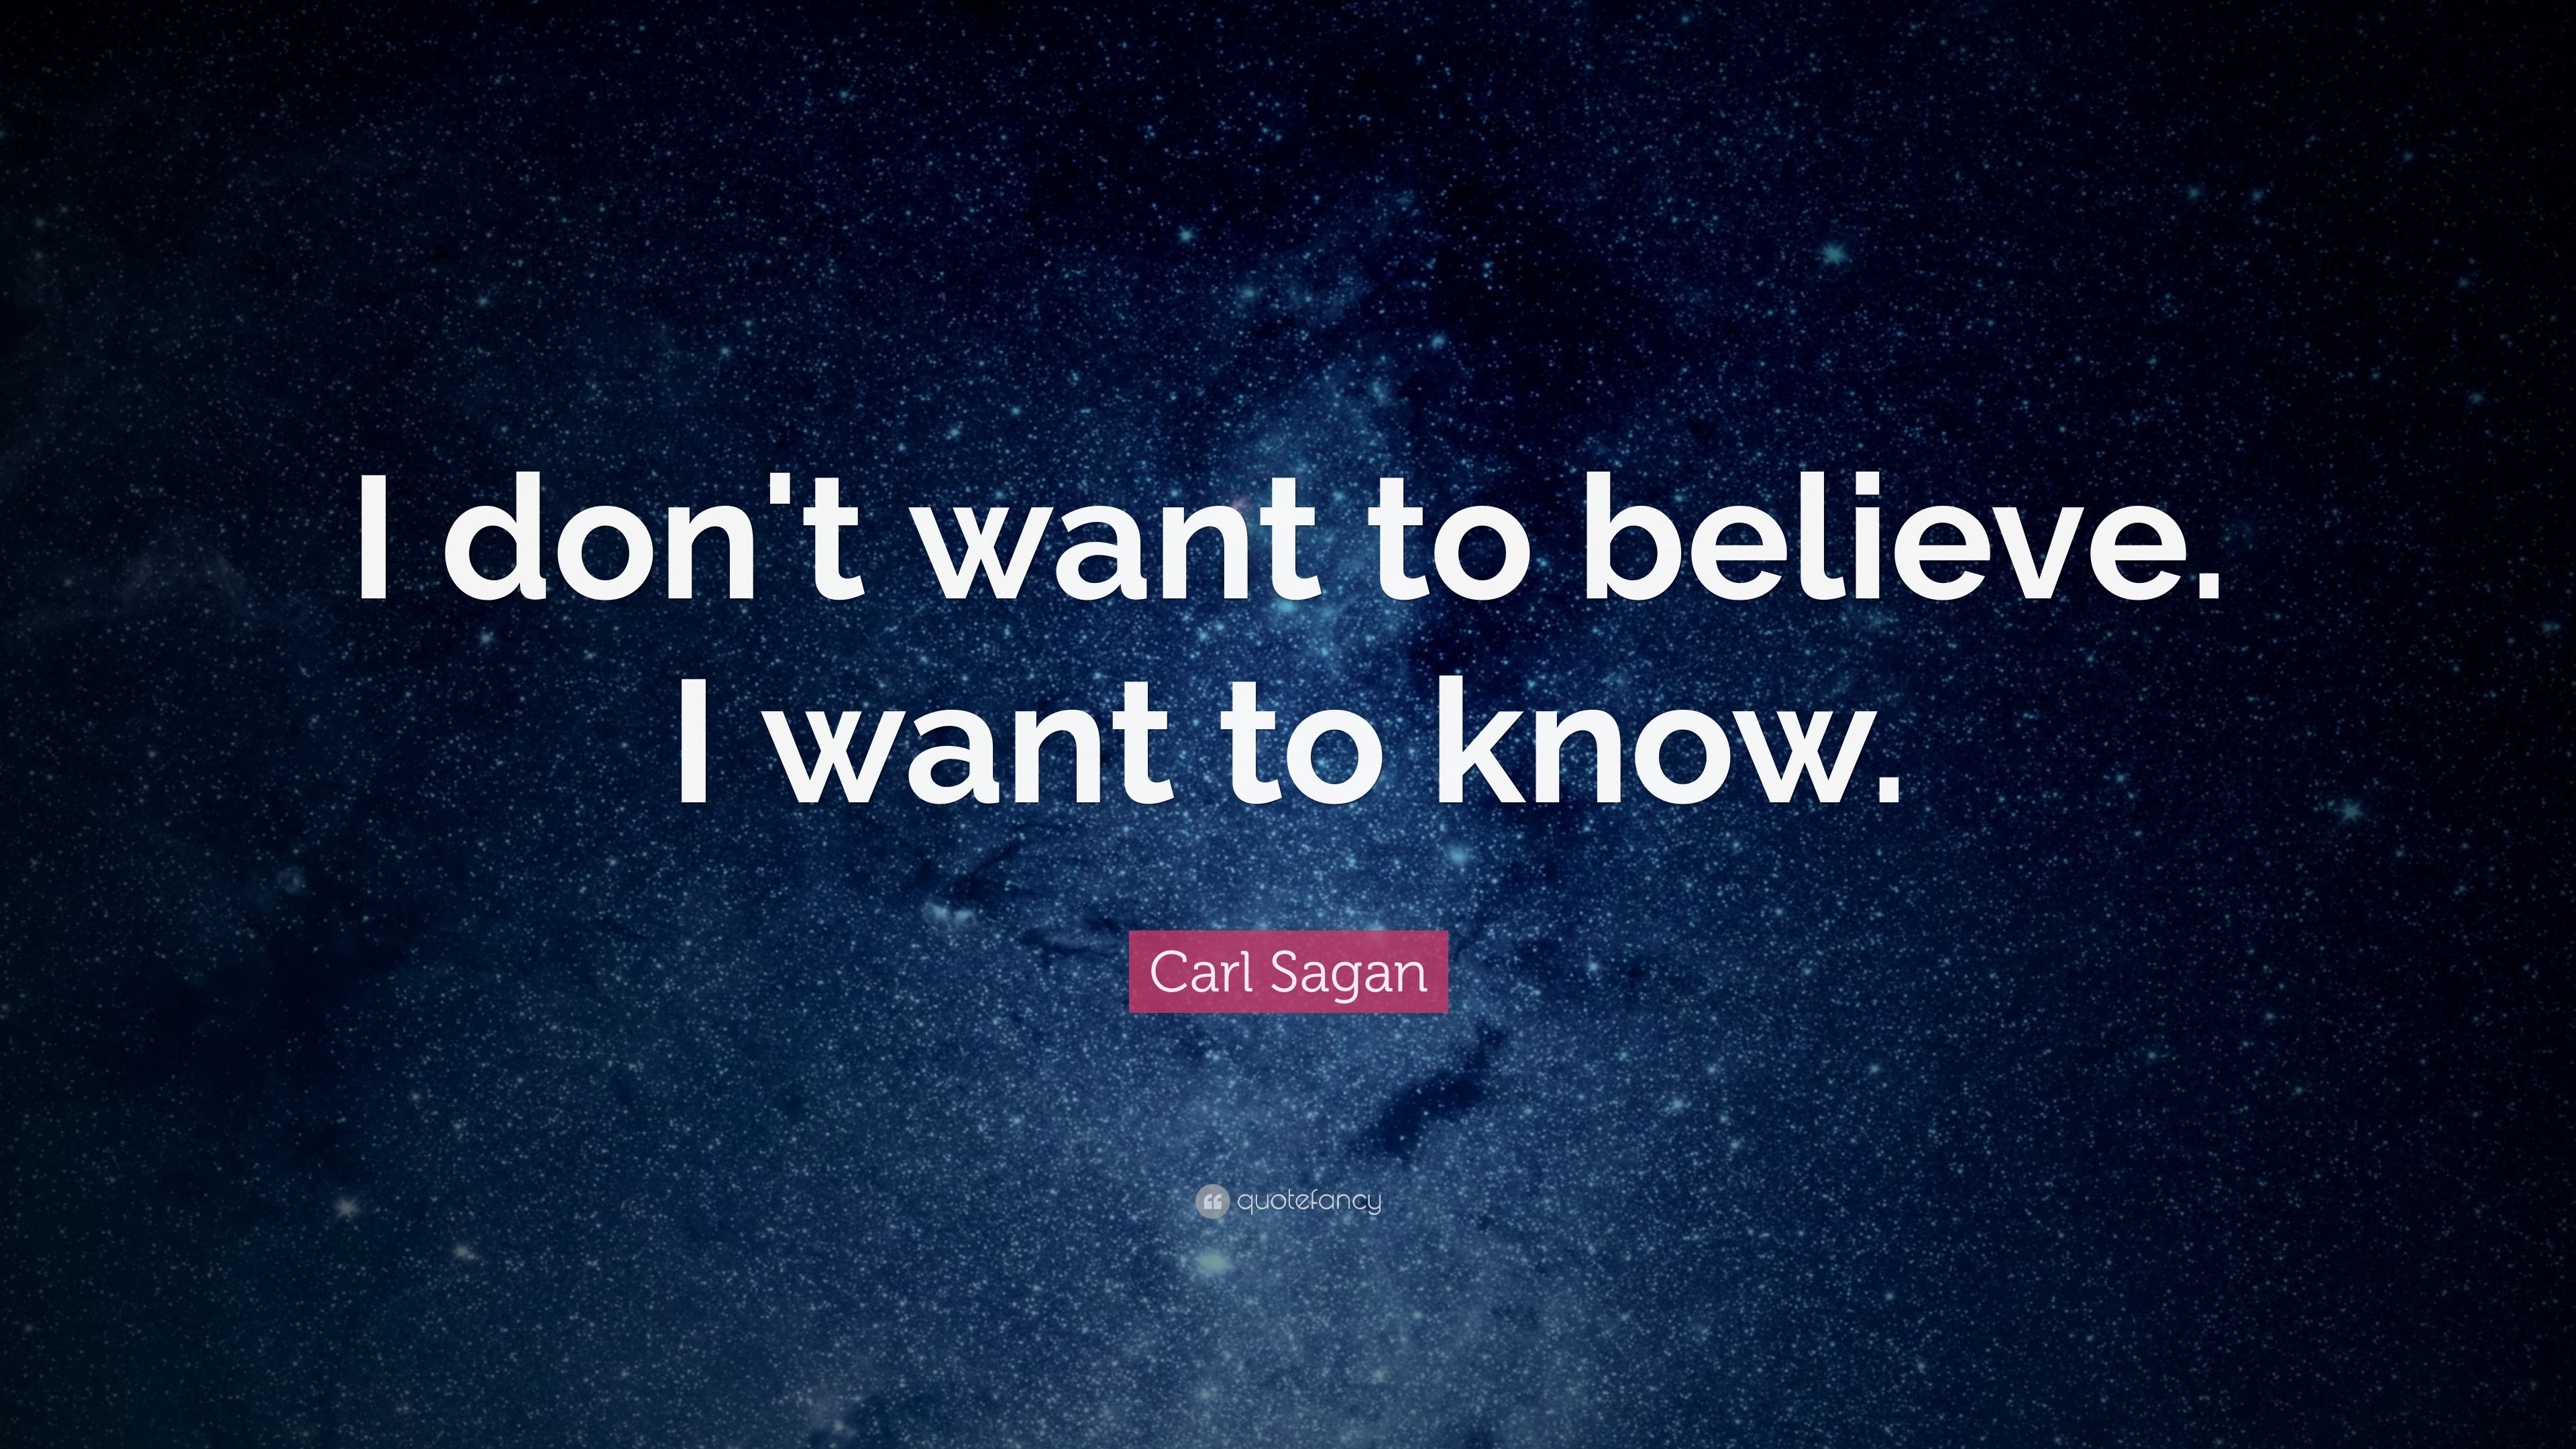 Carl Sagan Quote: “I don't want to believe. I want to know.” 20